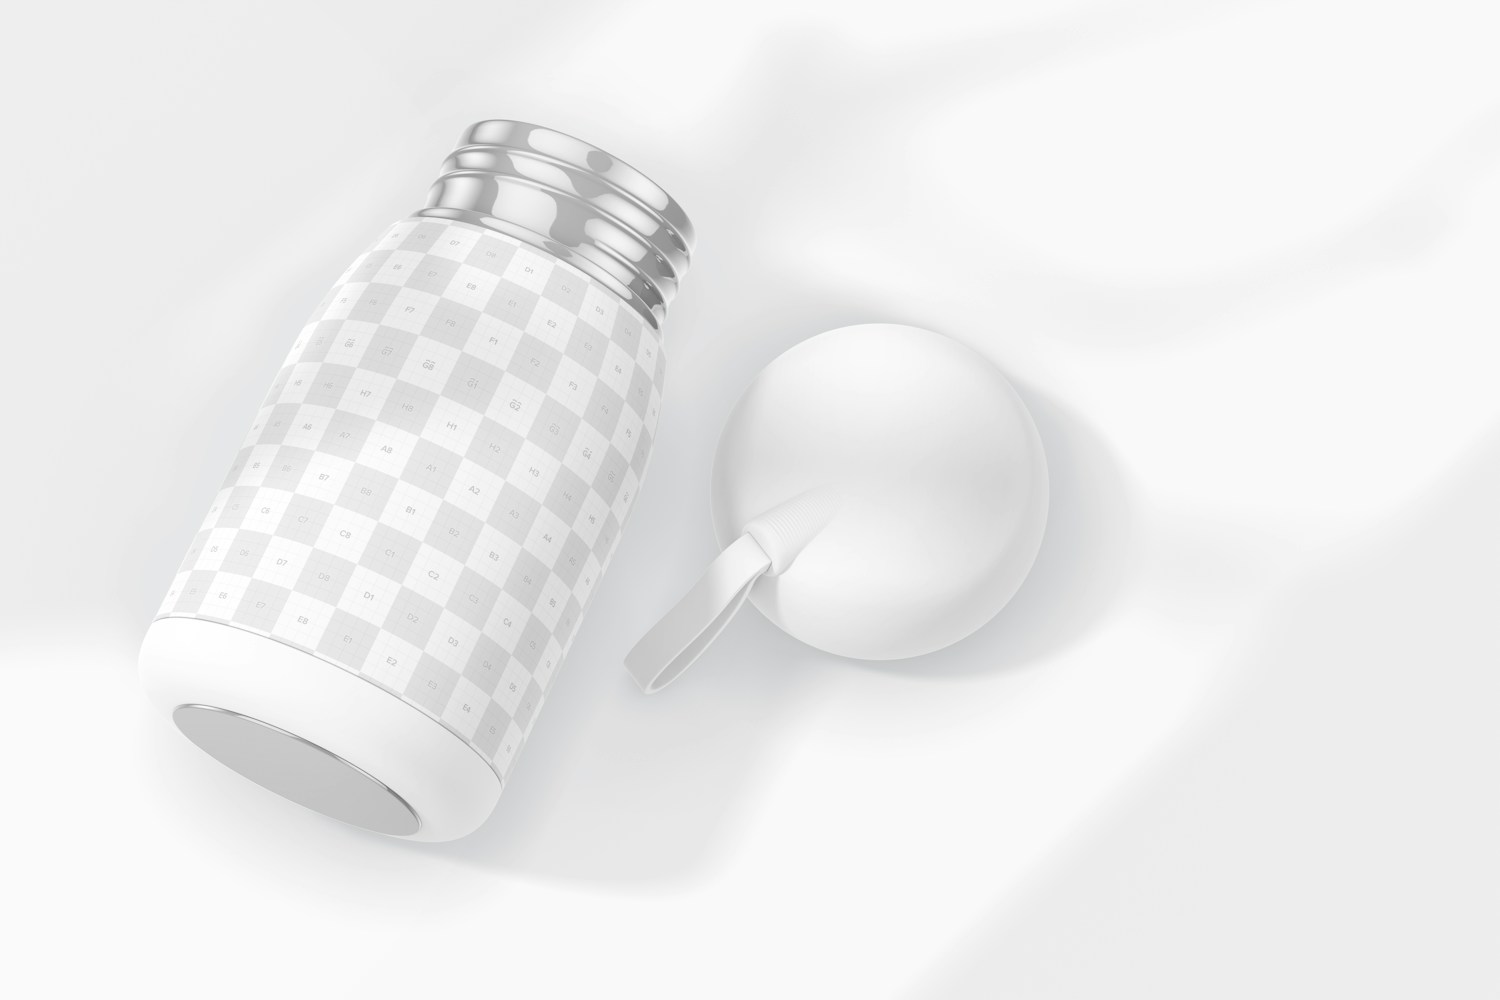 Small Kids Water Flask Mockup, Top View